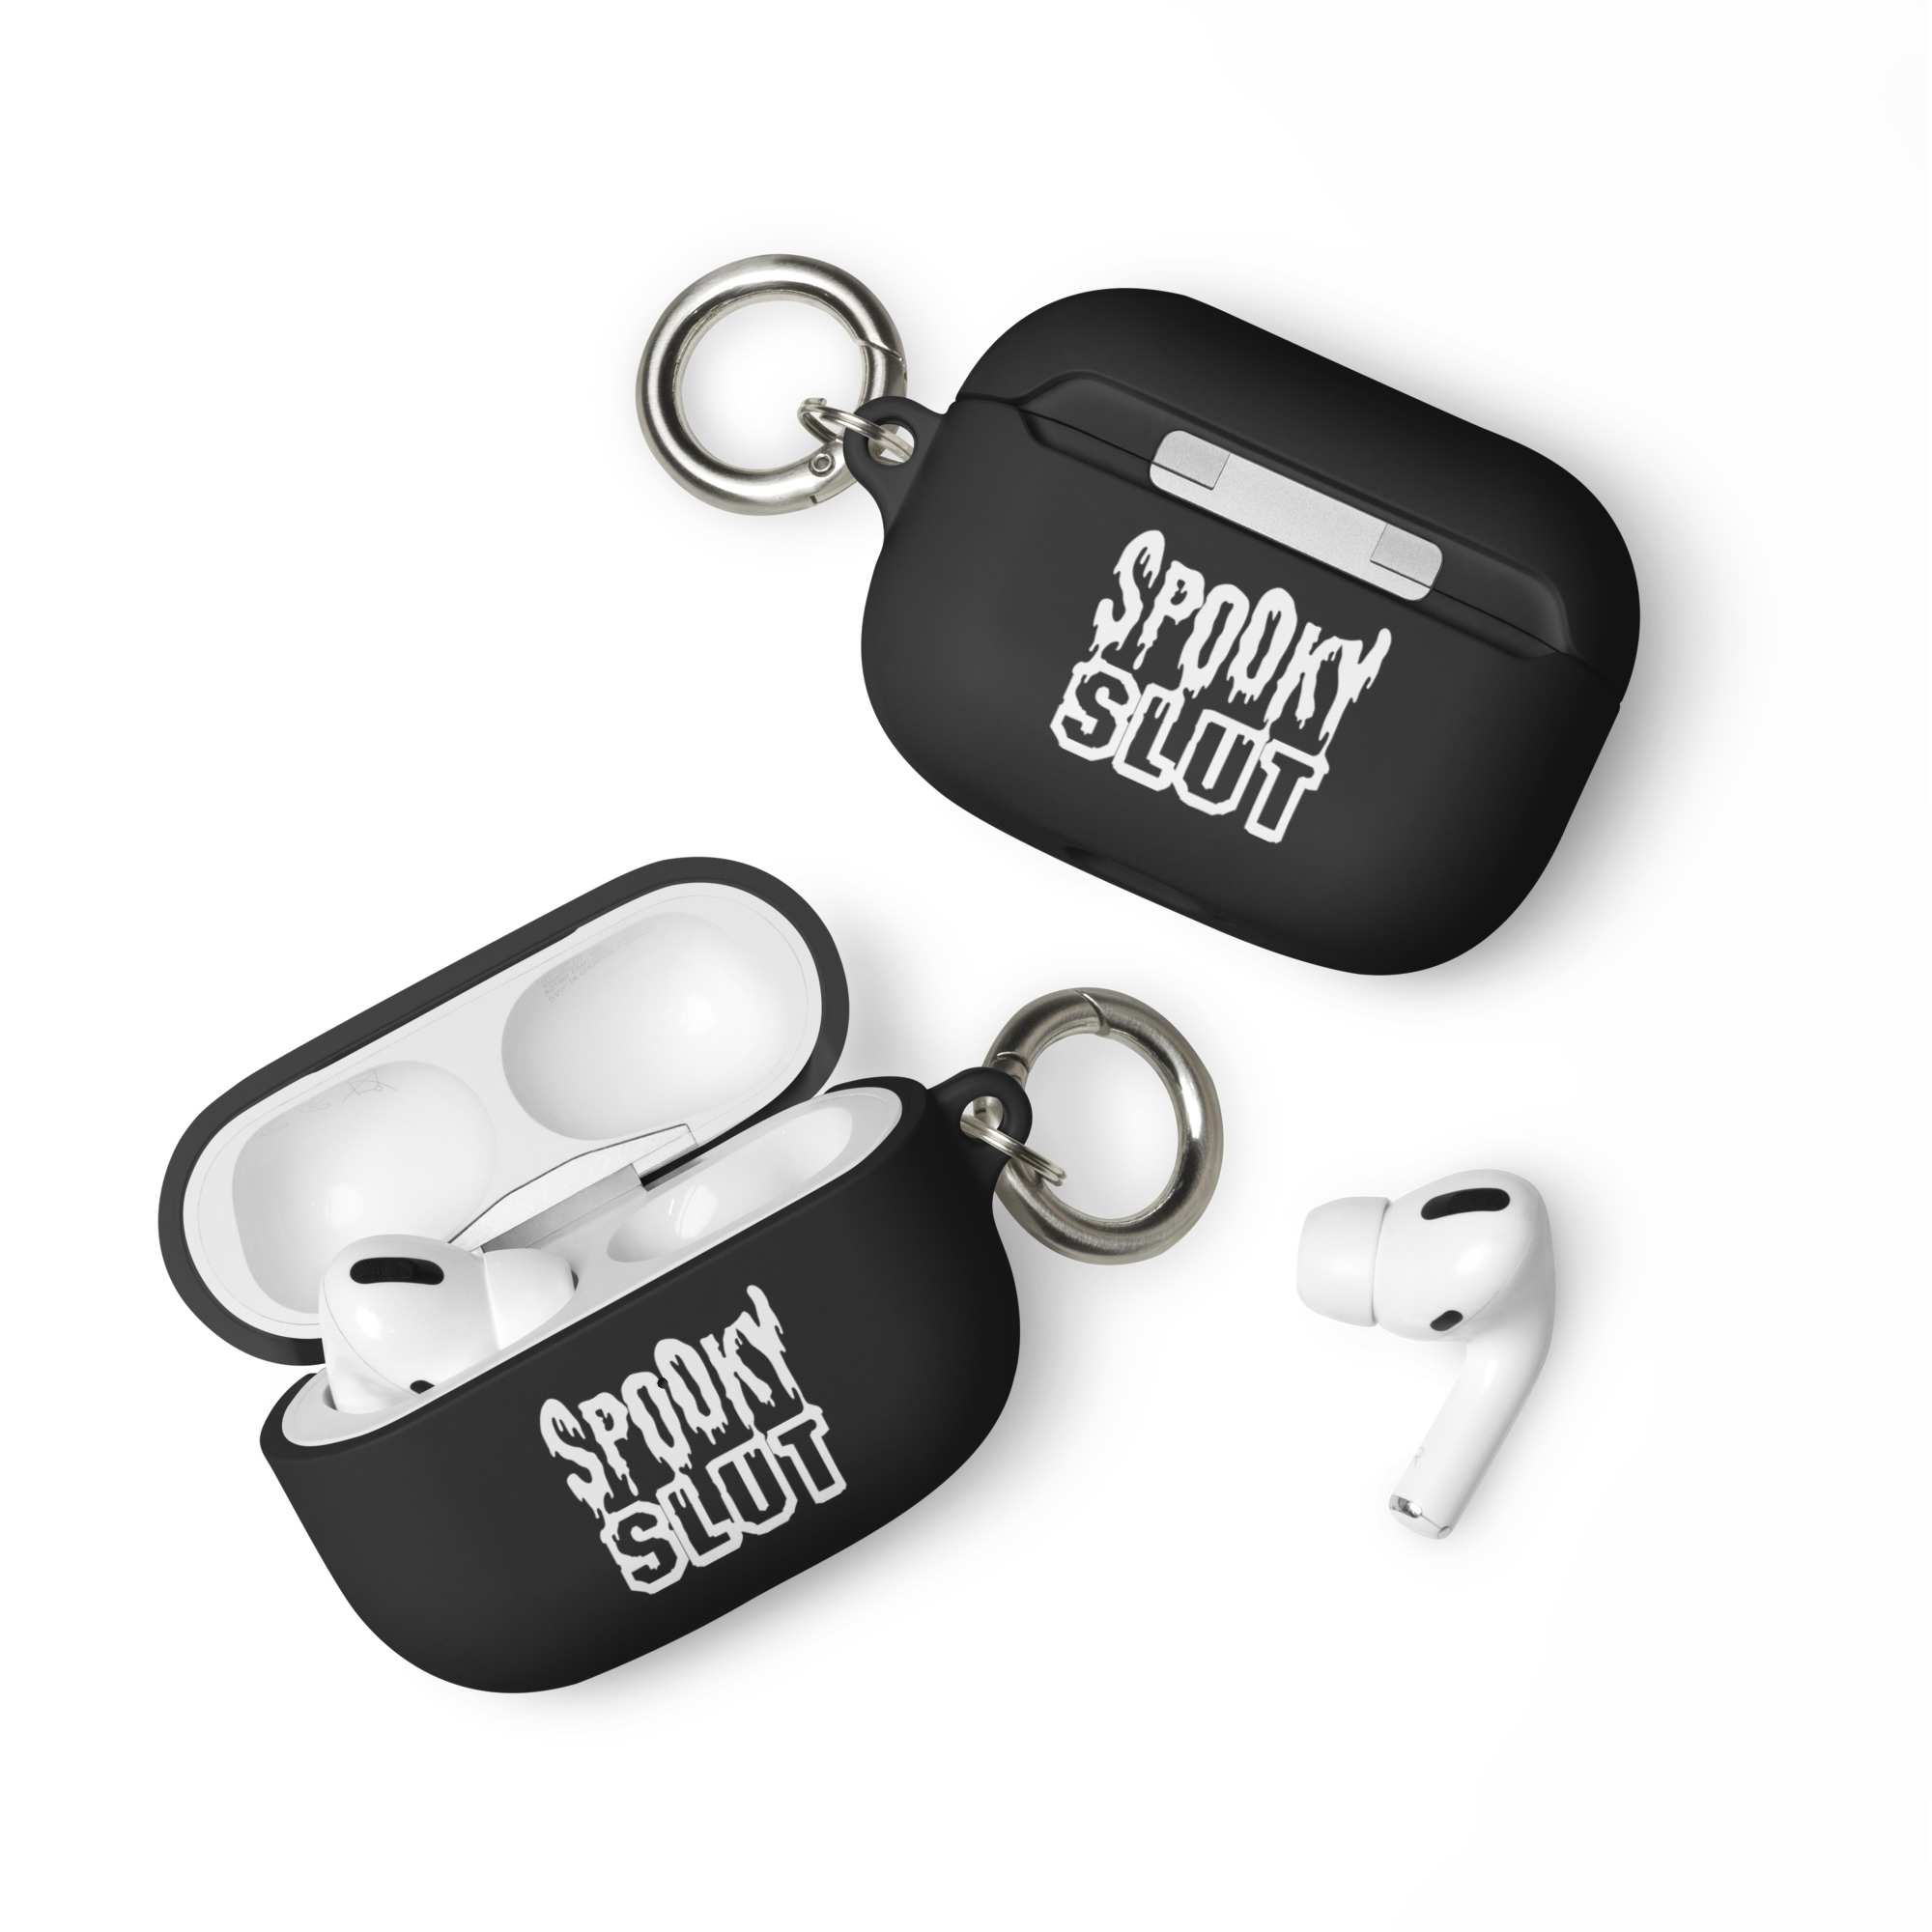 Featured image for “Spooky Sl*t - AirPods case”